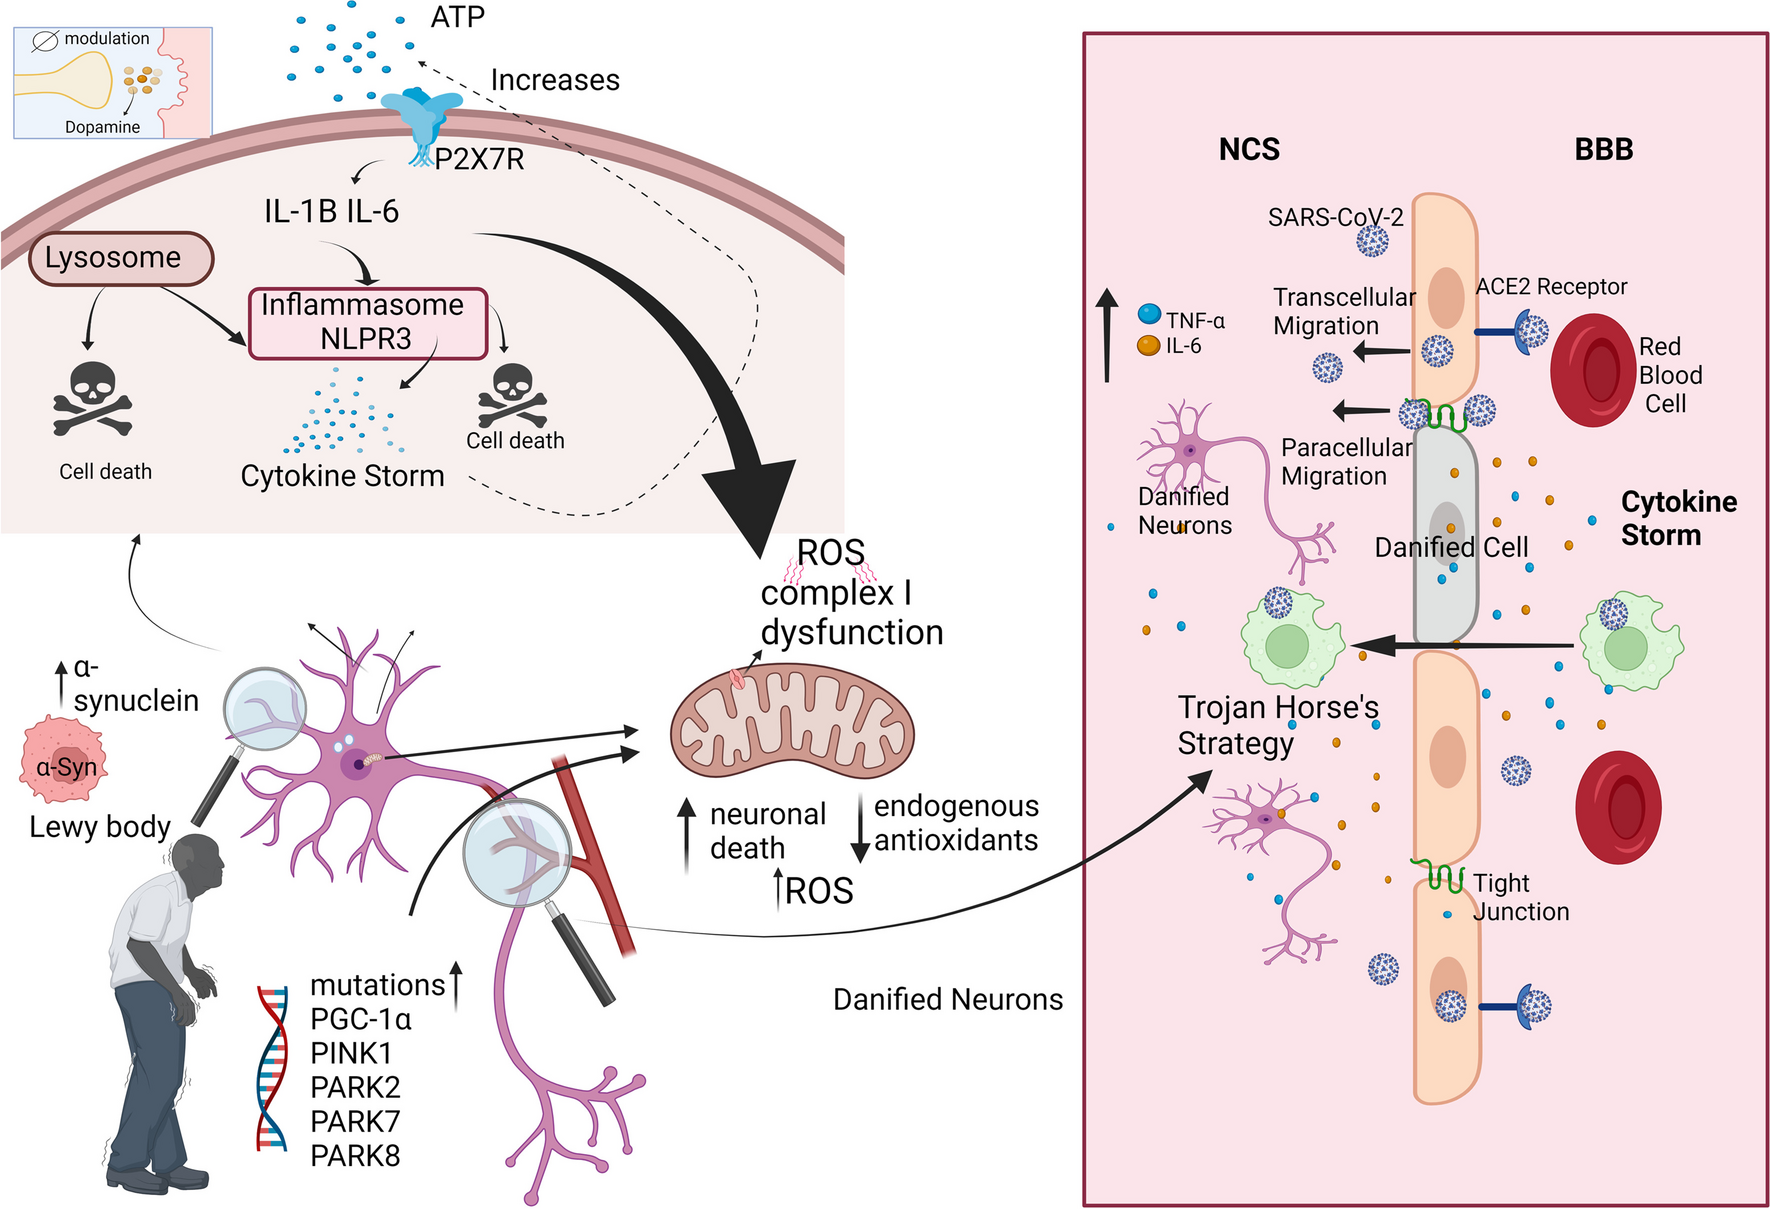 Implications of COVID-19 in Parkinson’s disease: the purinergic system in a therapeutic-target perspective to diminish neurodegeneration